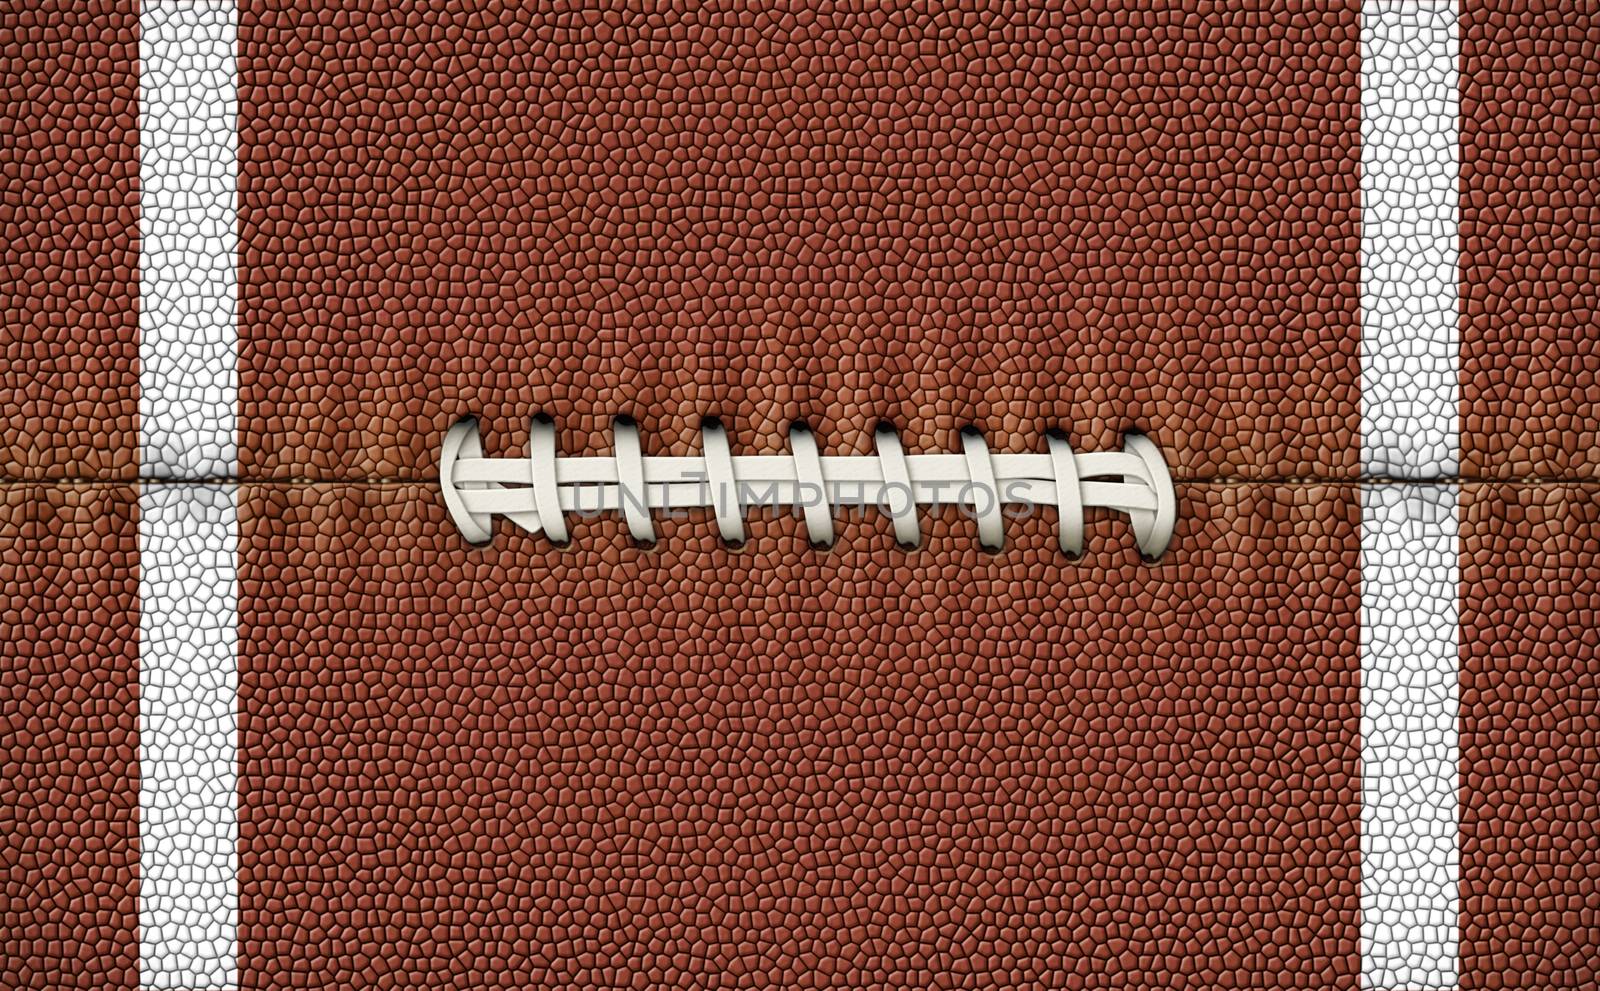 Digital Illustration of a footballÕs texture, laces, and stripes to use as a background for text or other graphics.          